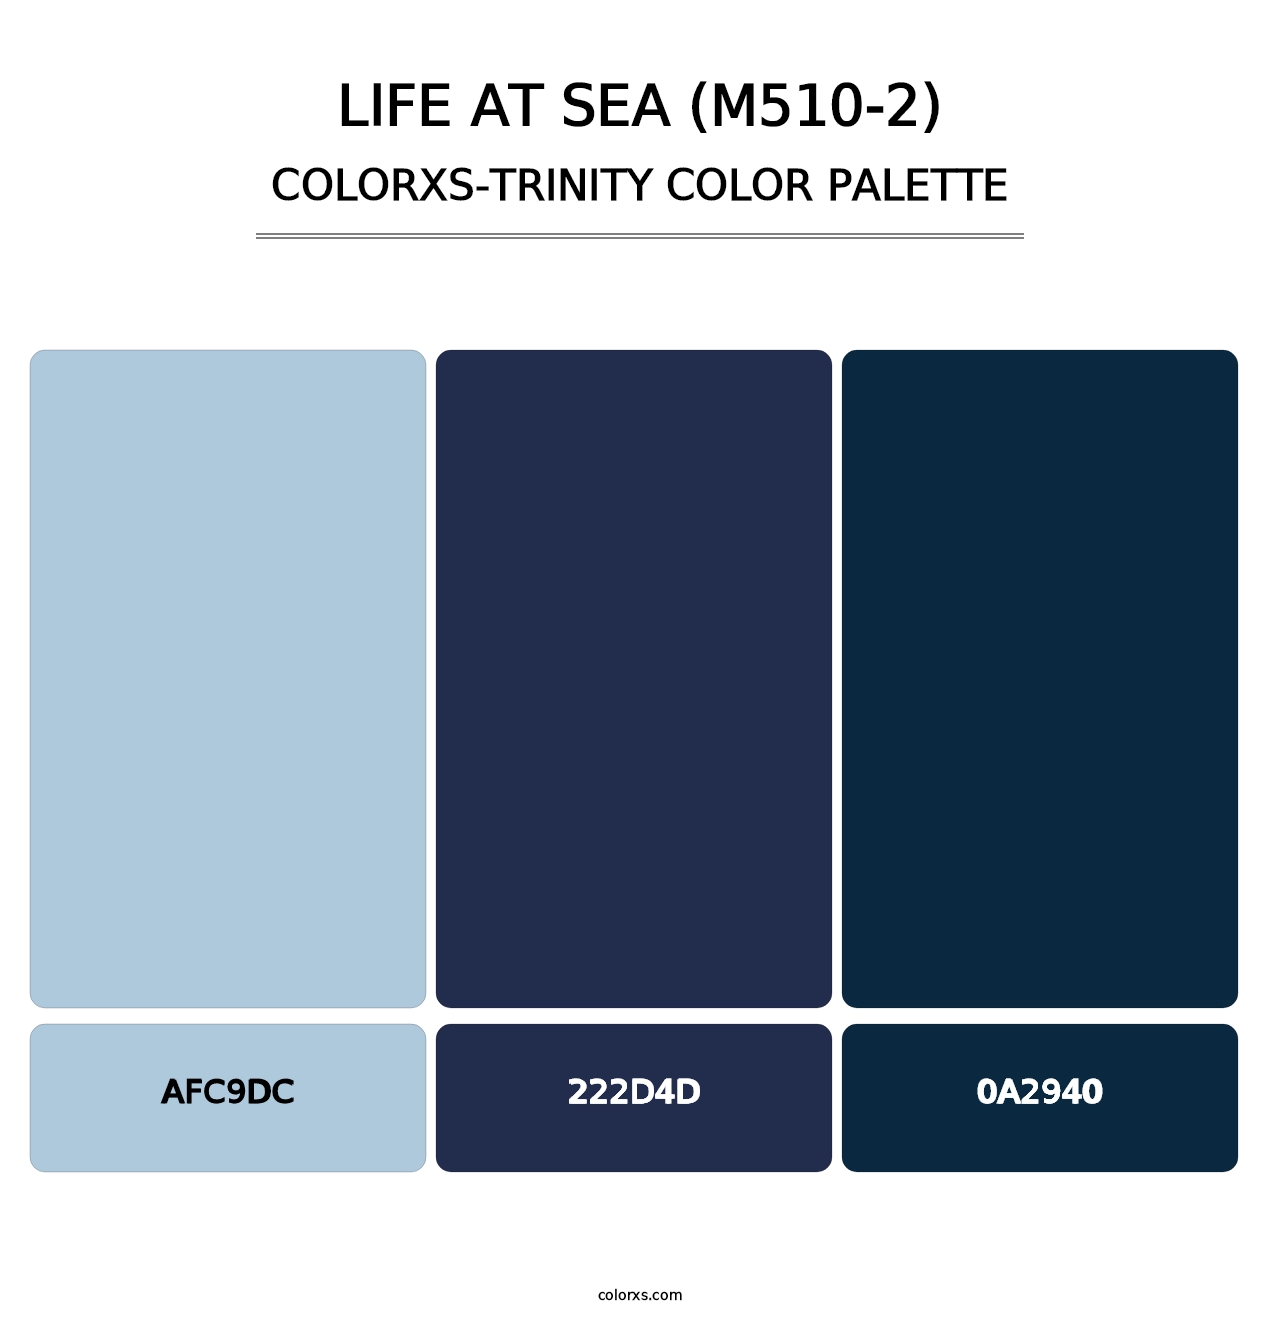 Life At Sea (M510-2) - Colorxs Trinity Palette